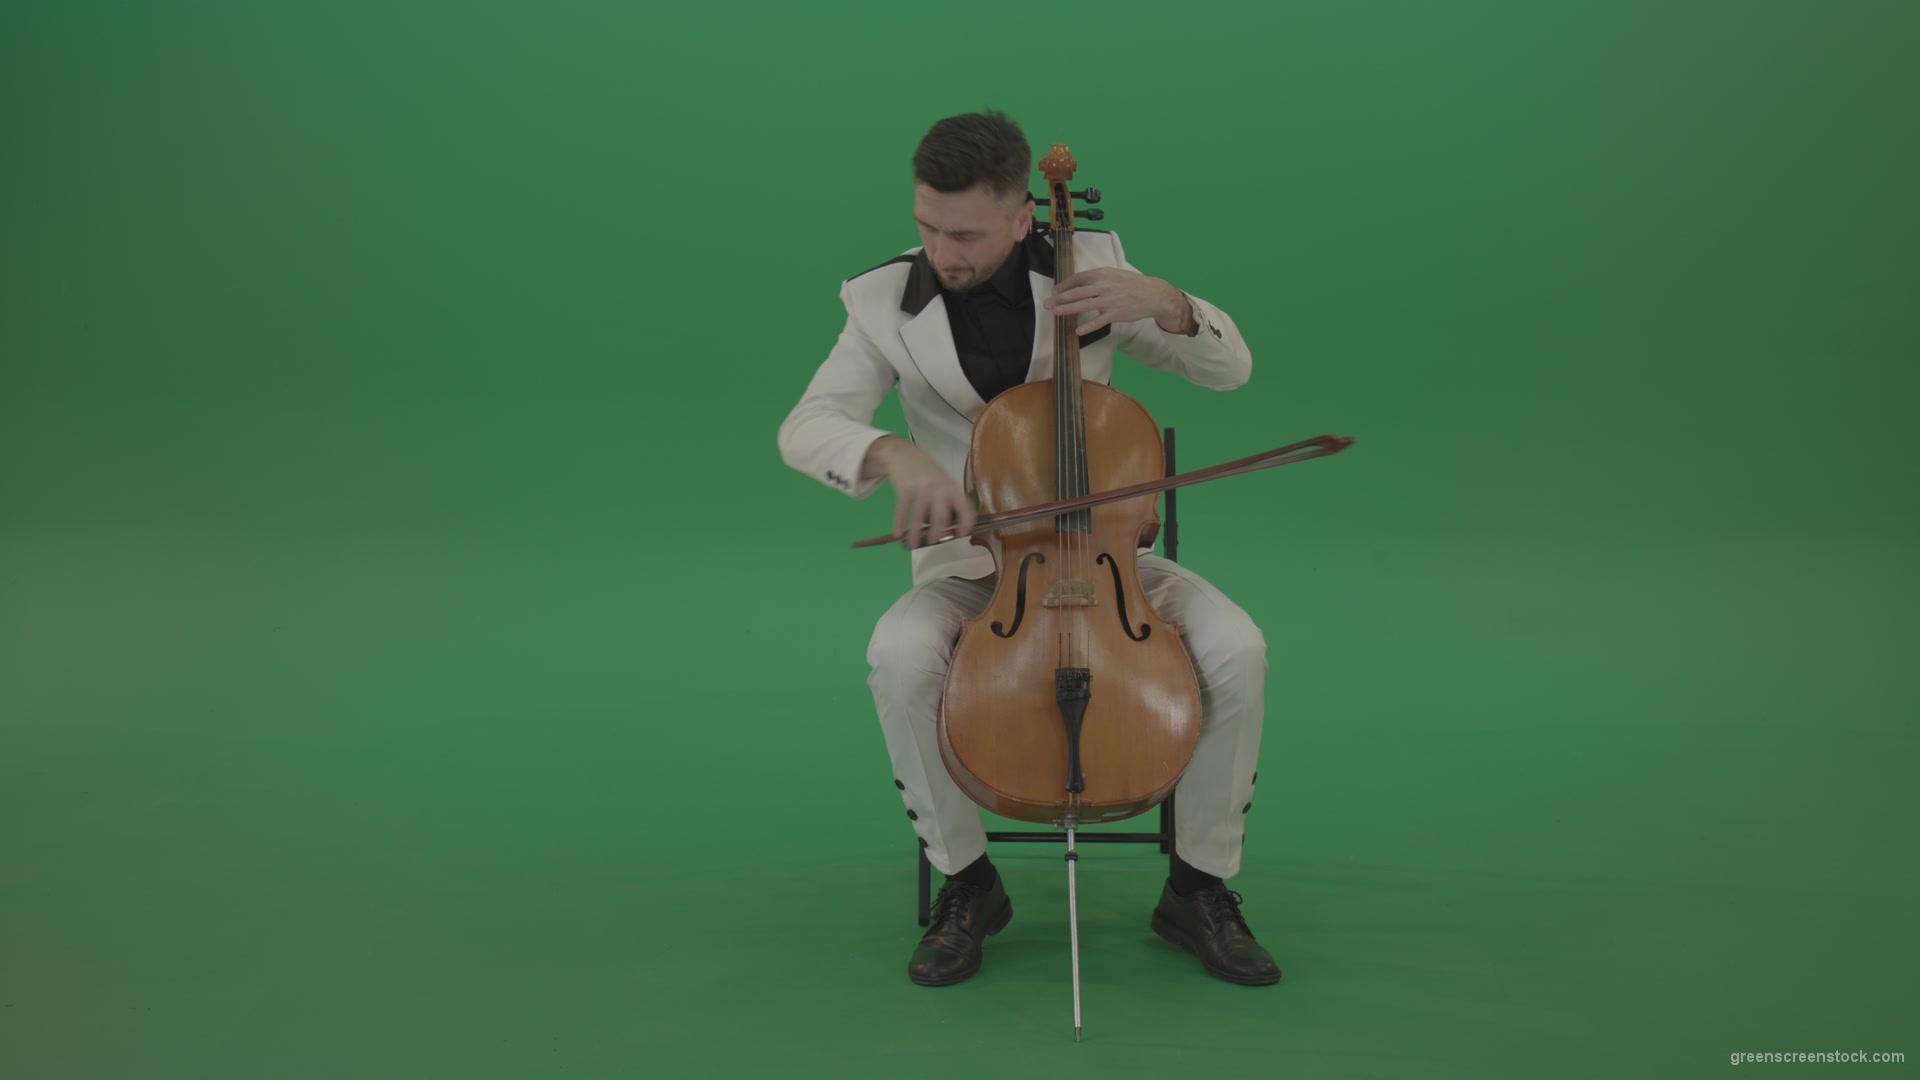 Classic-orchestra-man-in-white-wear-play-violoncello-cello-strings-music-instrument-isolated-on-green-screen_006 Green Screen Stock